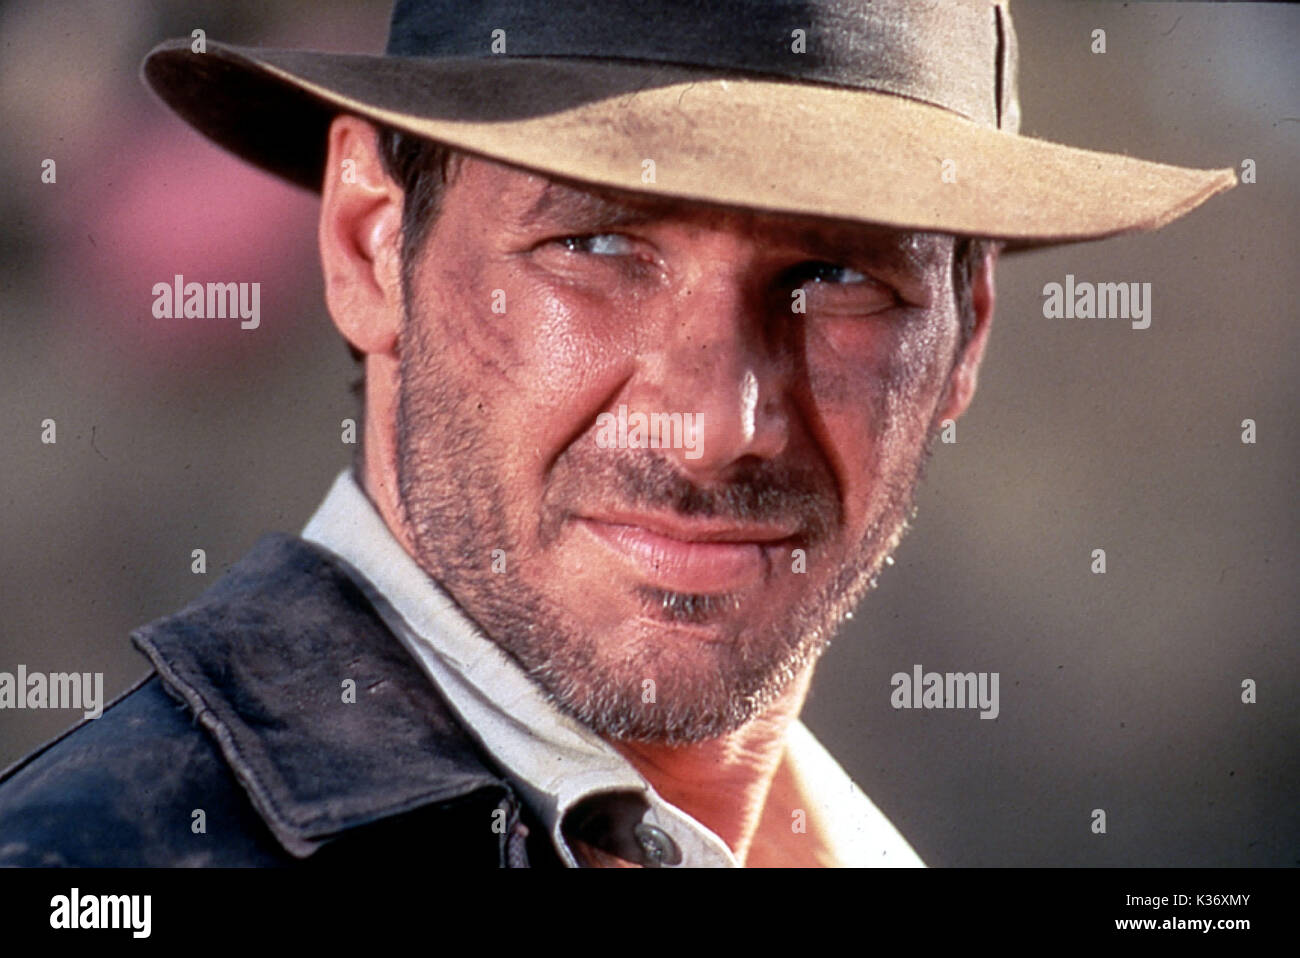 INDIANA JONES RAIDERS OF THE LOST ARC HARRISON FORD     Date: 1981 Stock Photo